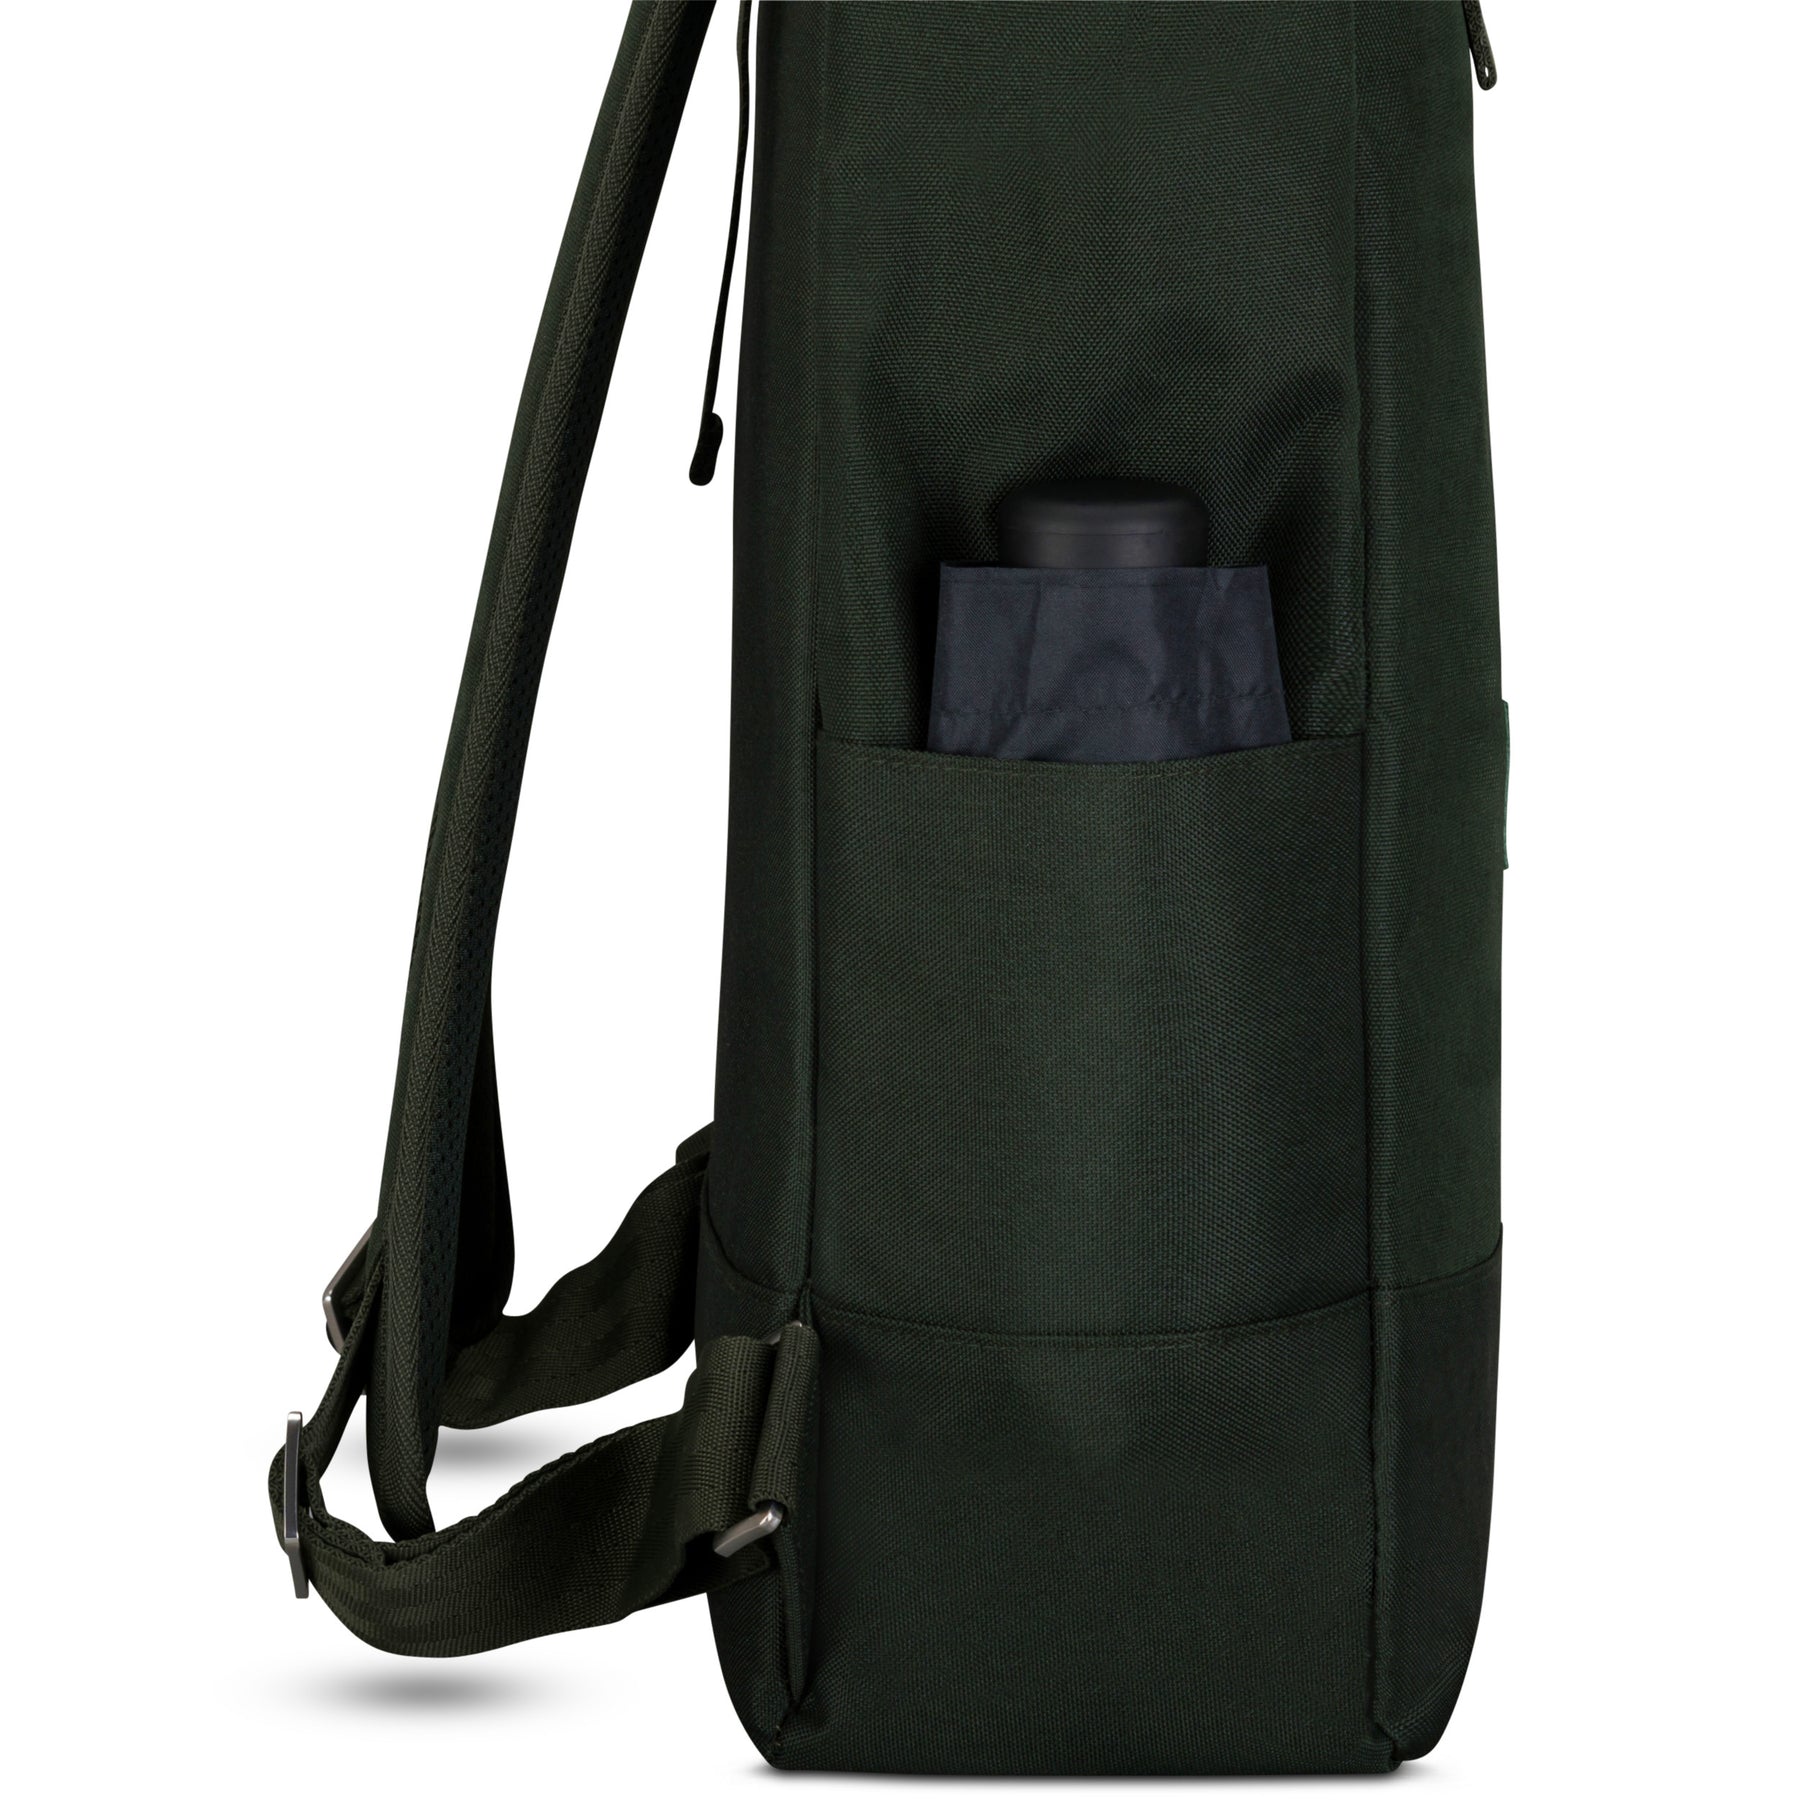 Roll Top Backpack "Robin Large" 